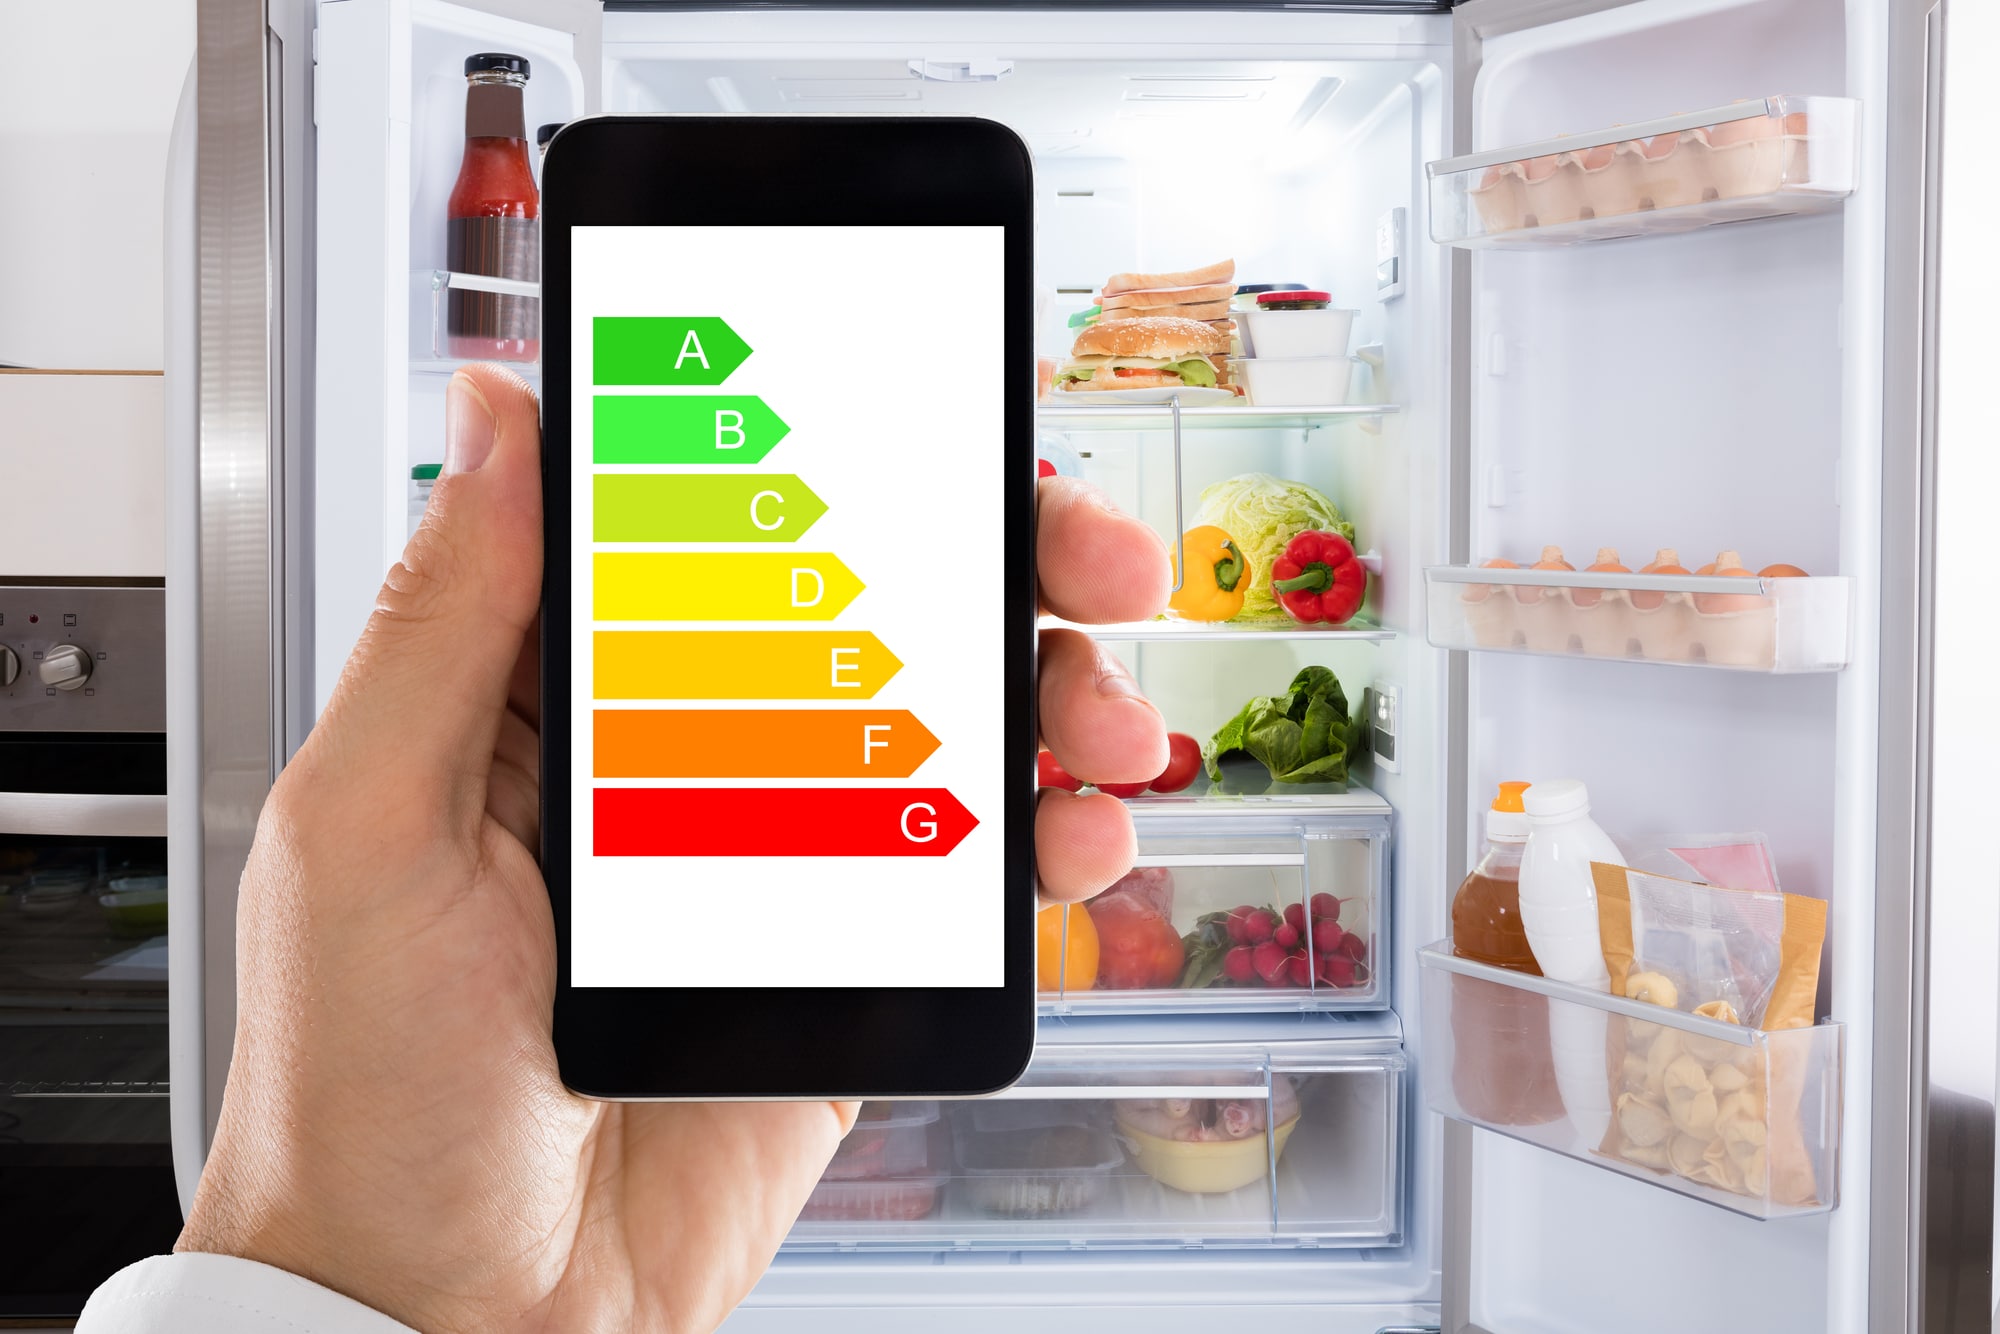 Refrigerator power consumption - Everything you need to know